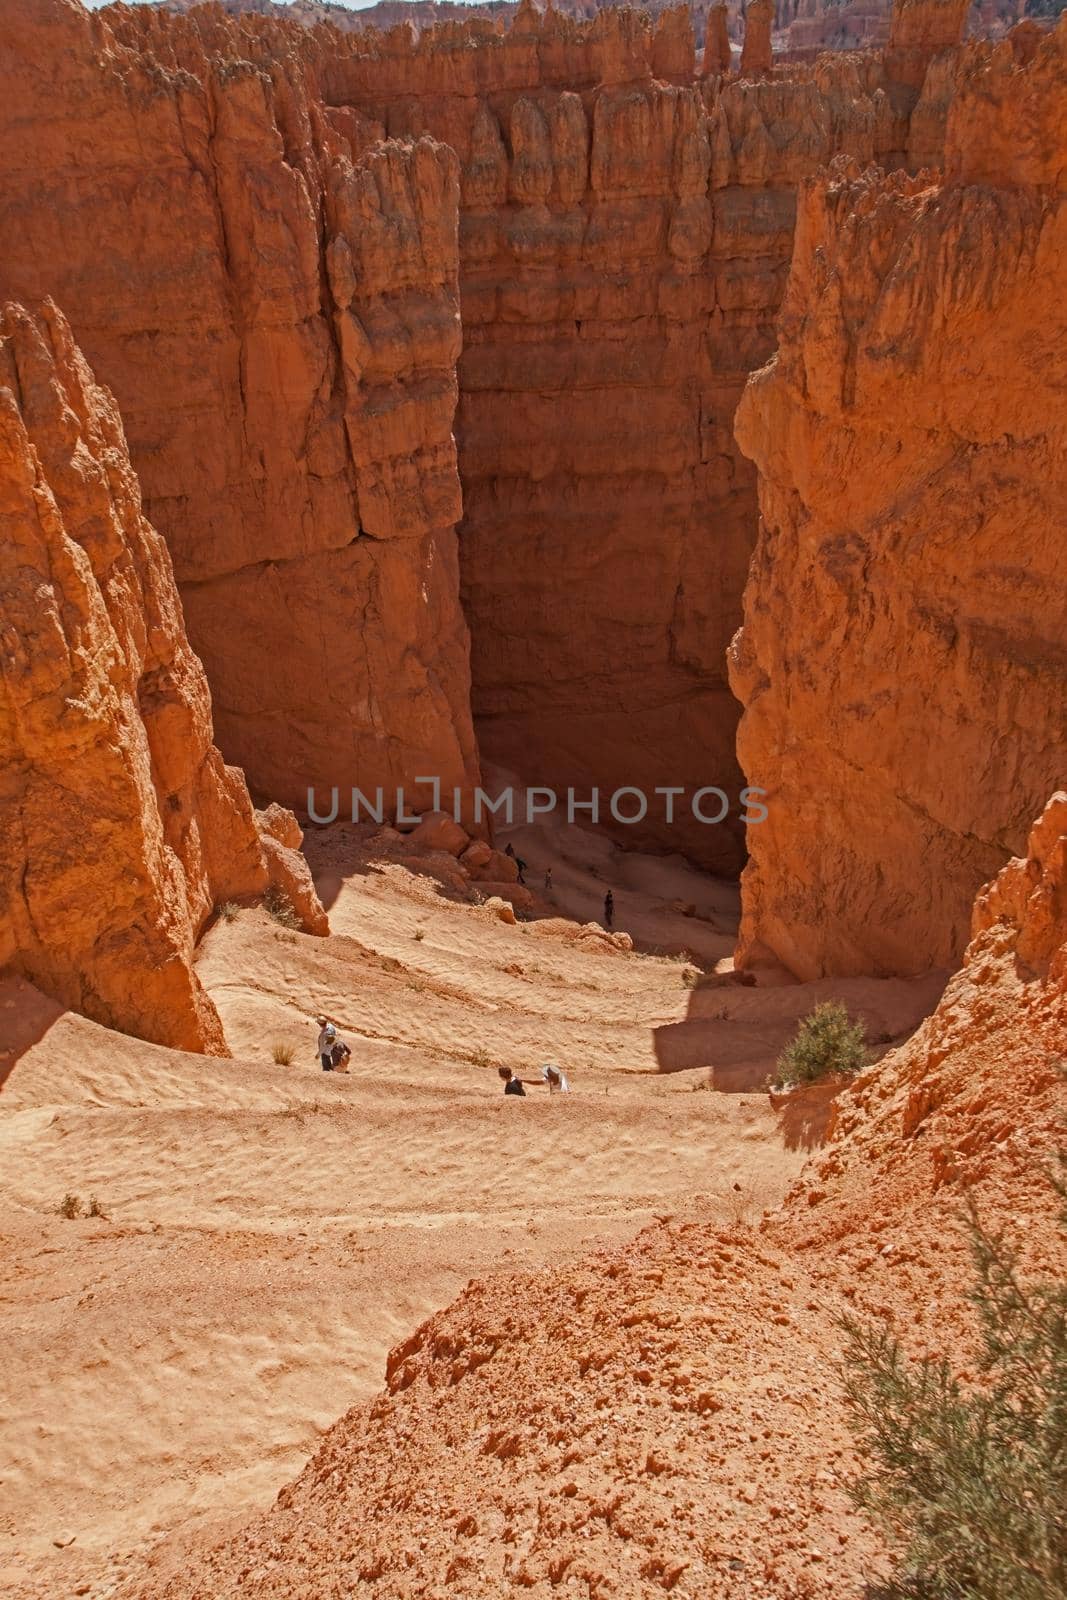 Hikers on the Switchbacks on the Navajo Trail 2483 by kobus_peche